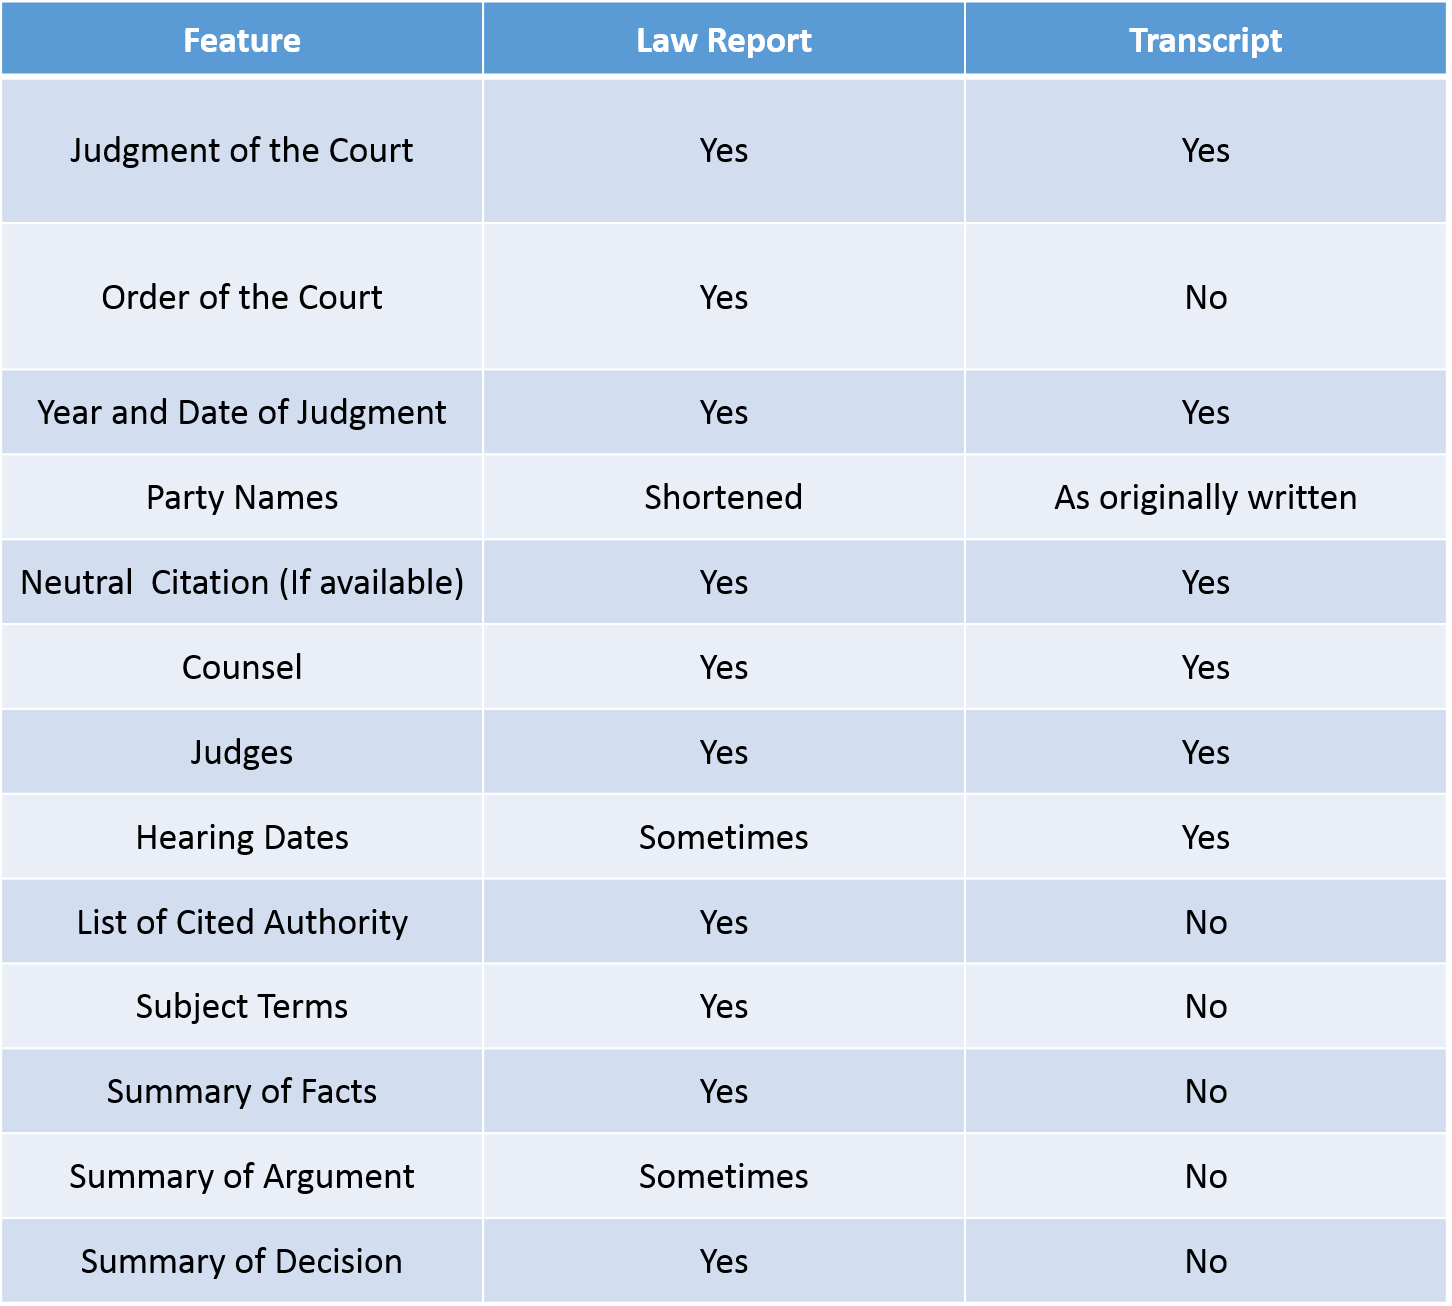 A comparison of Law Reports and Transcripts